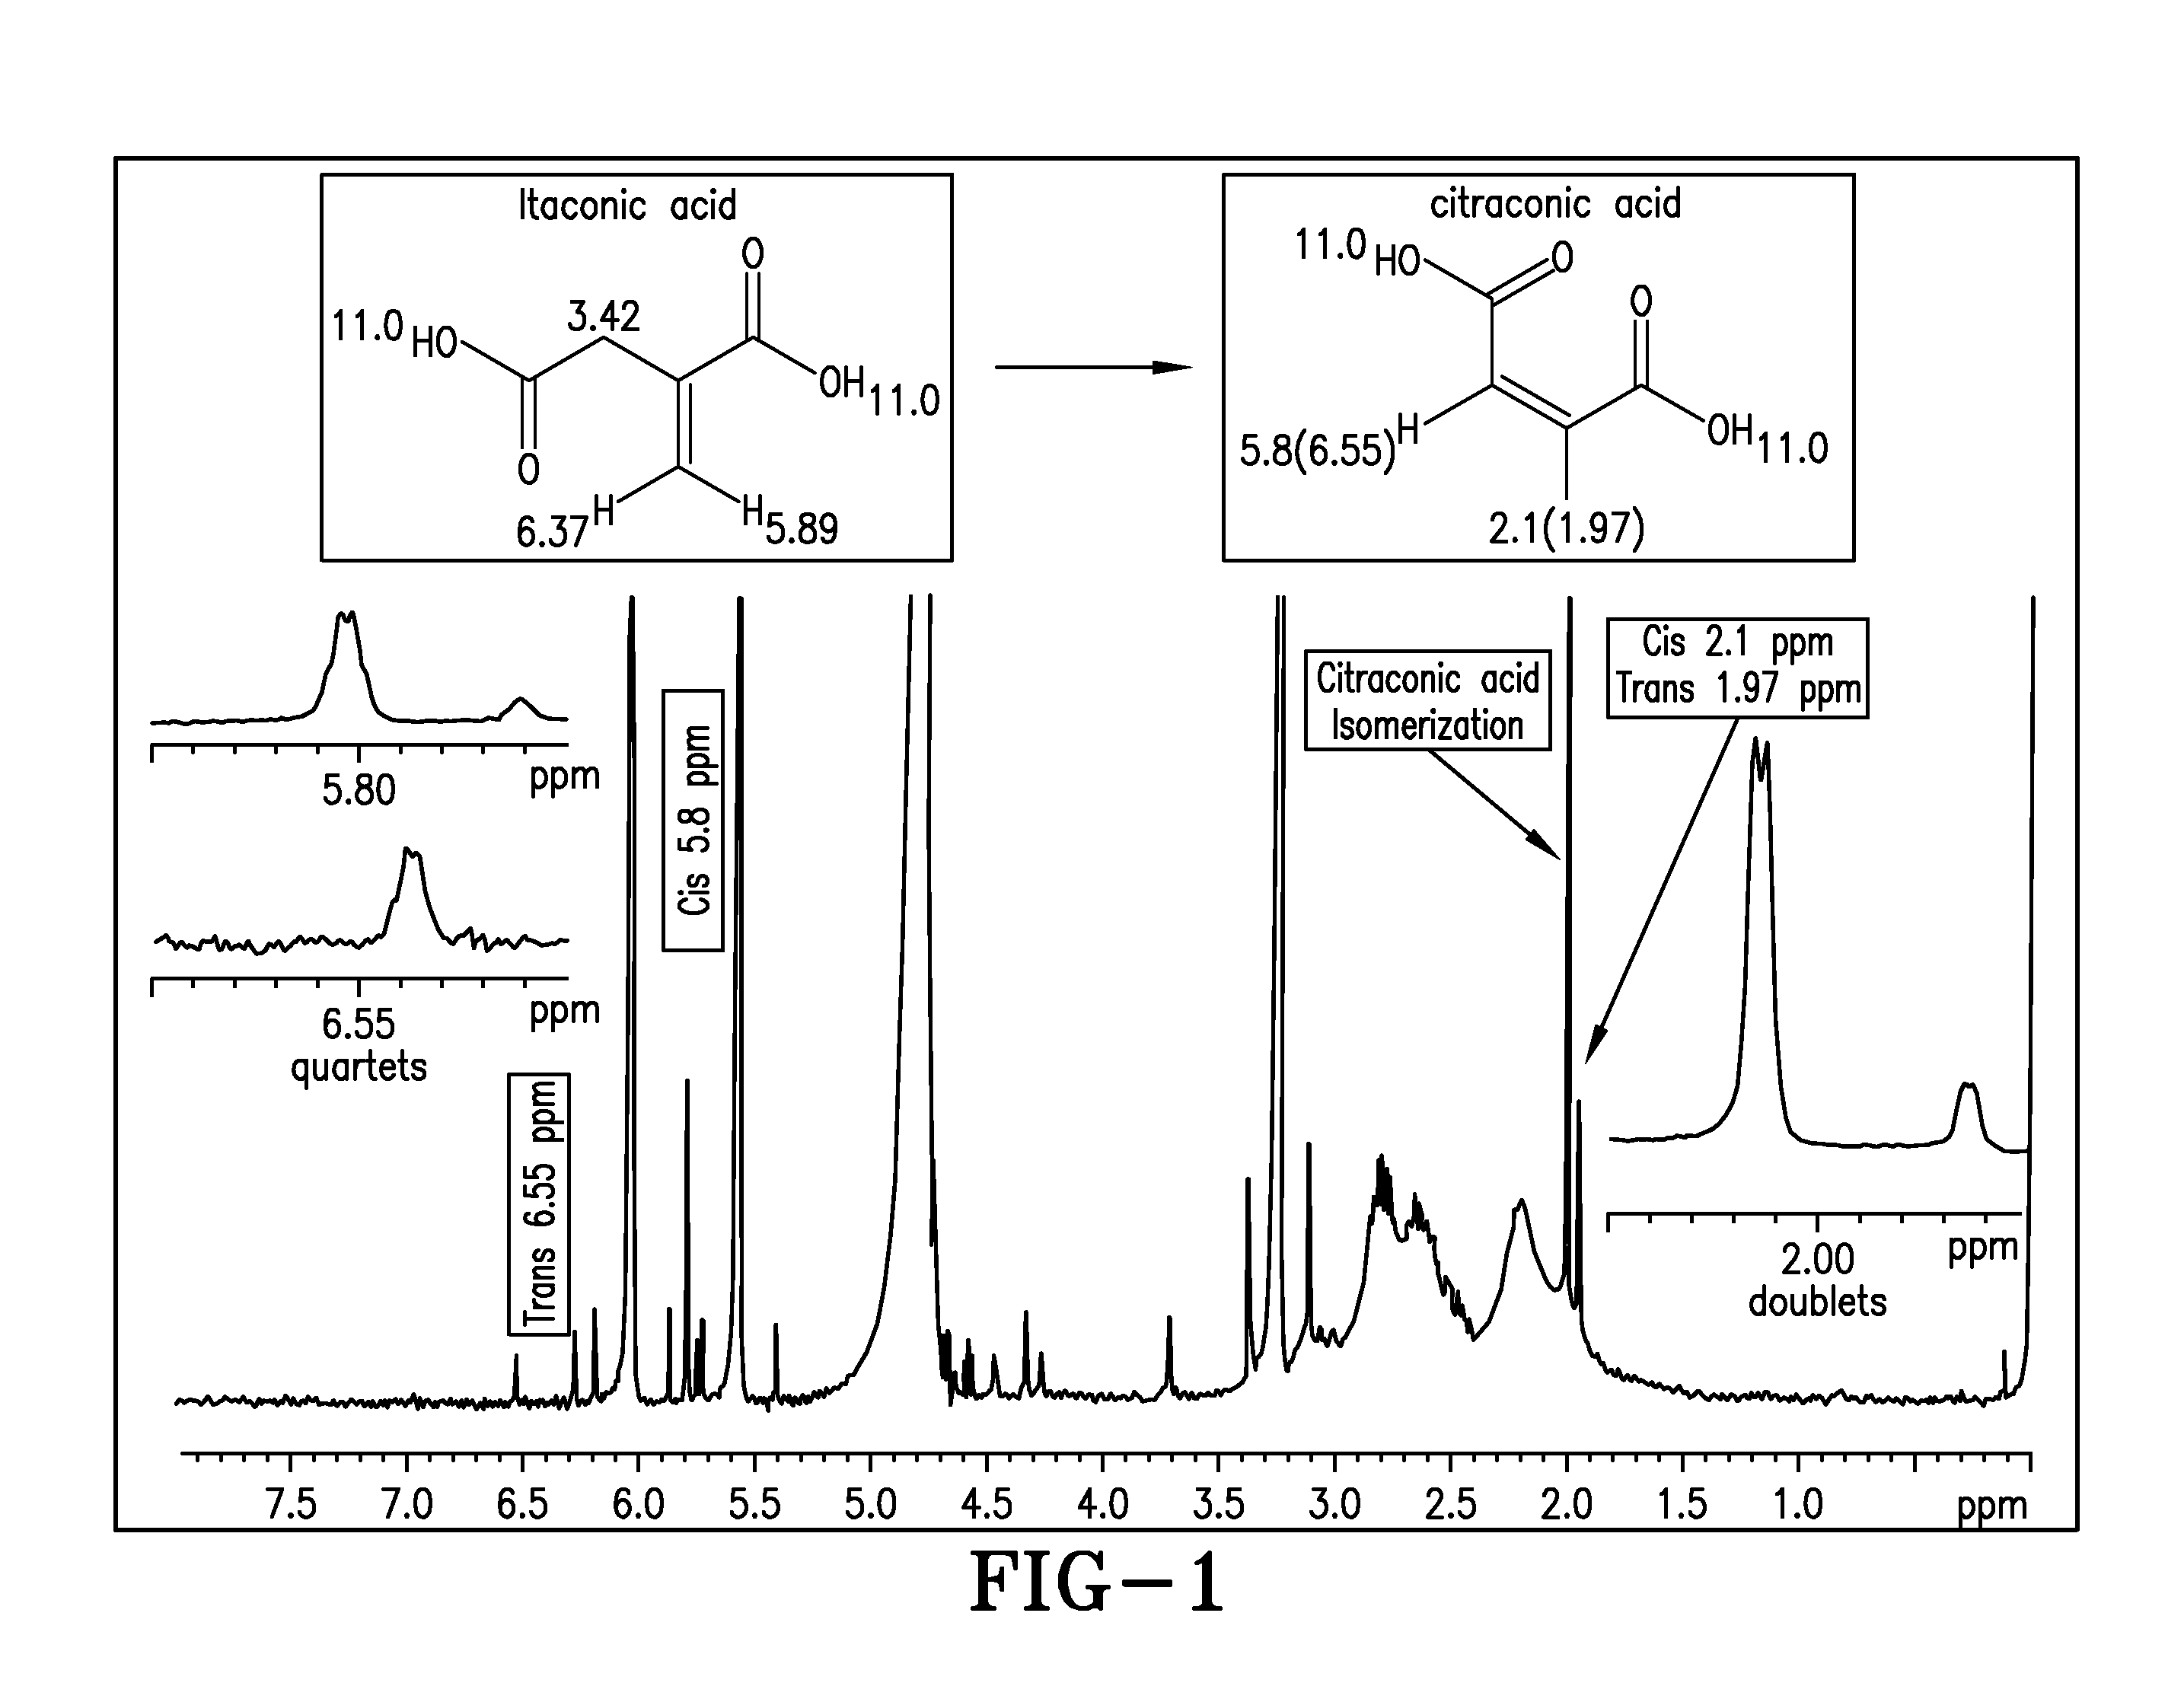 Itaconic acid polymers and copolymers